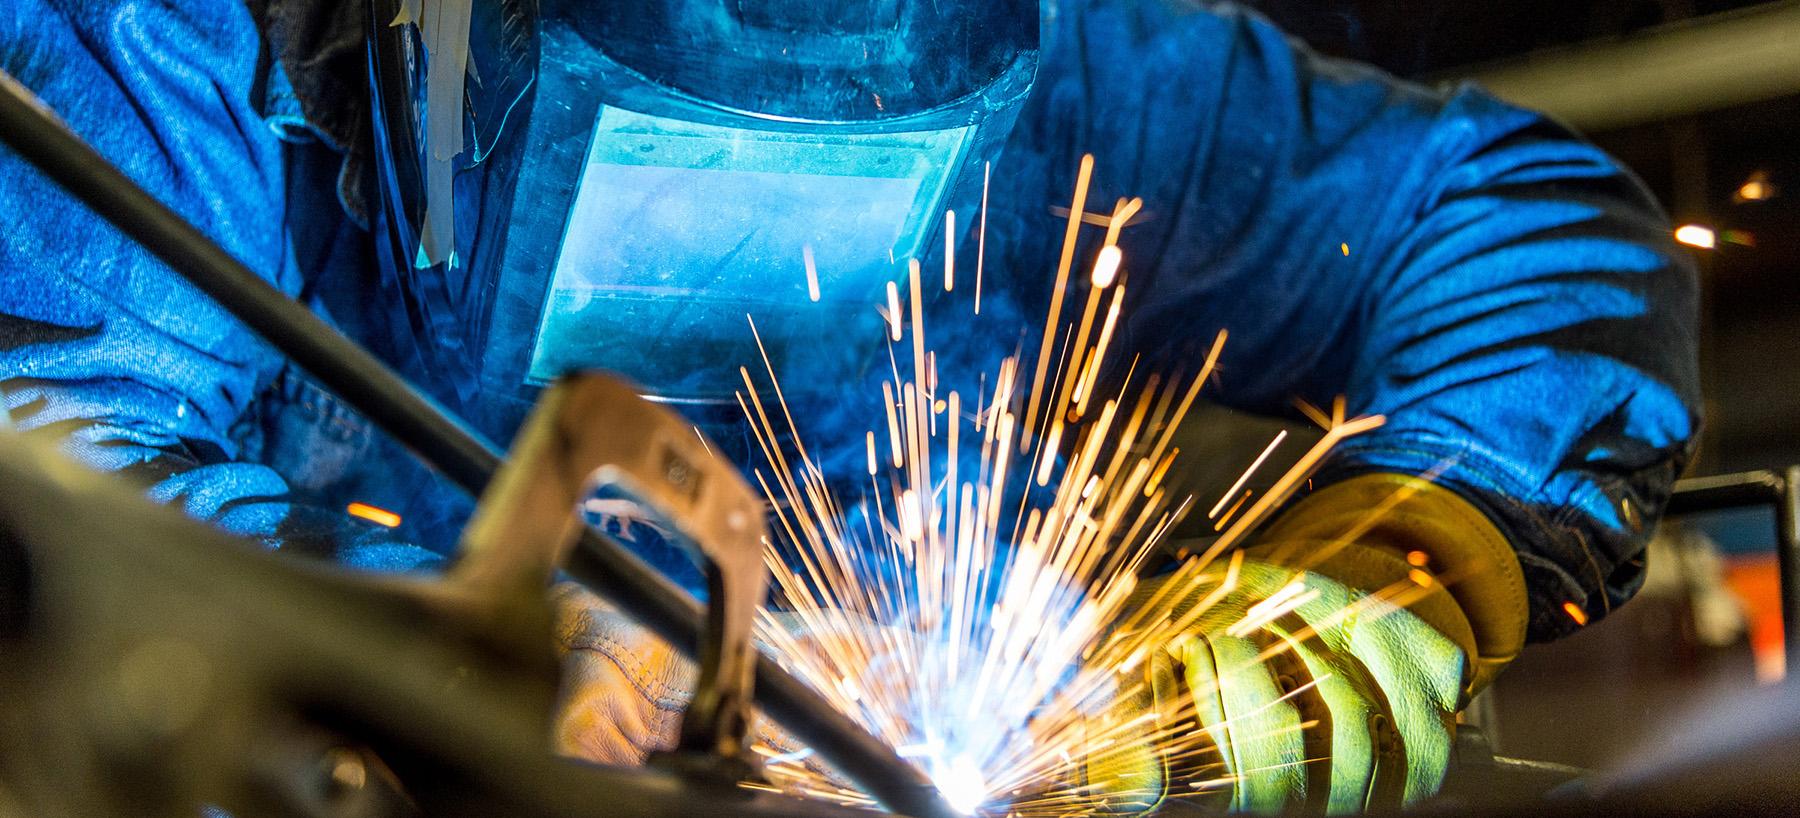 image of a student welding